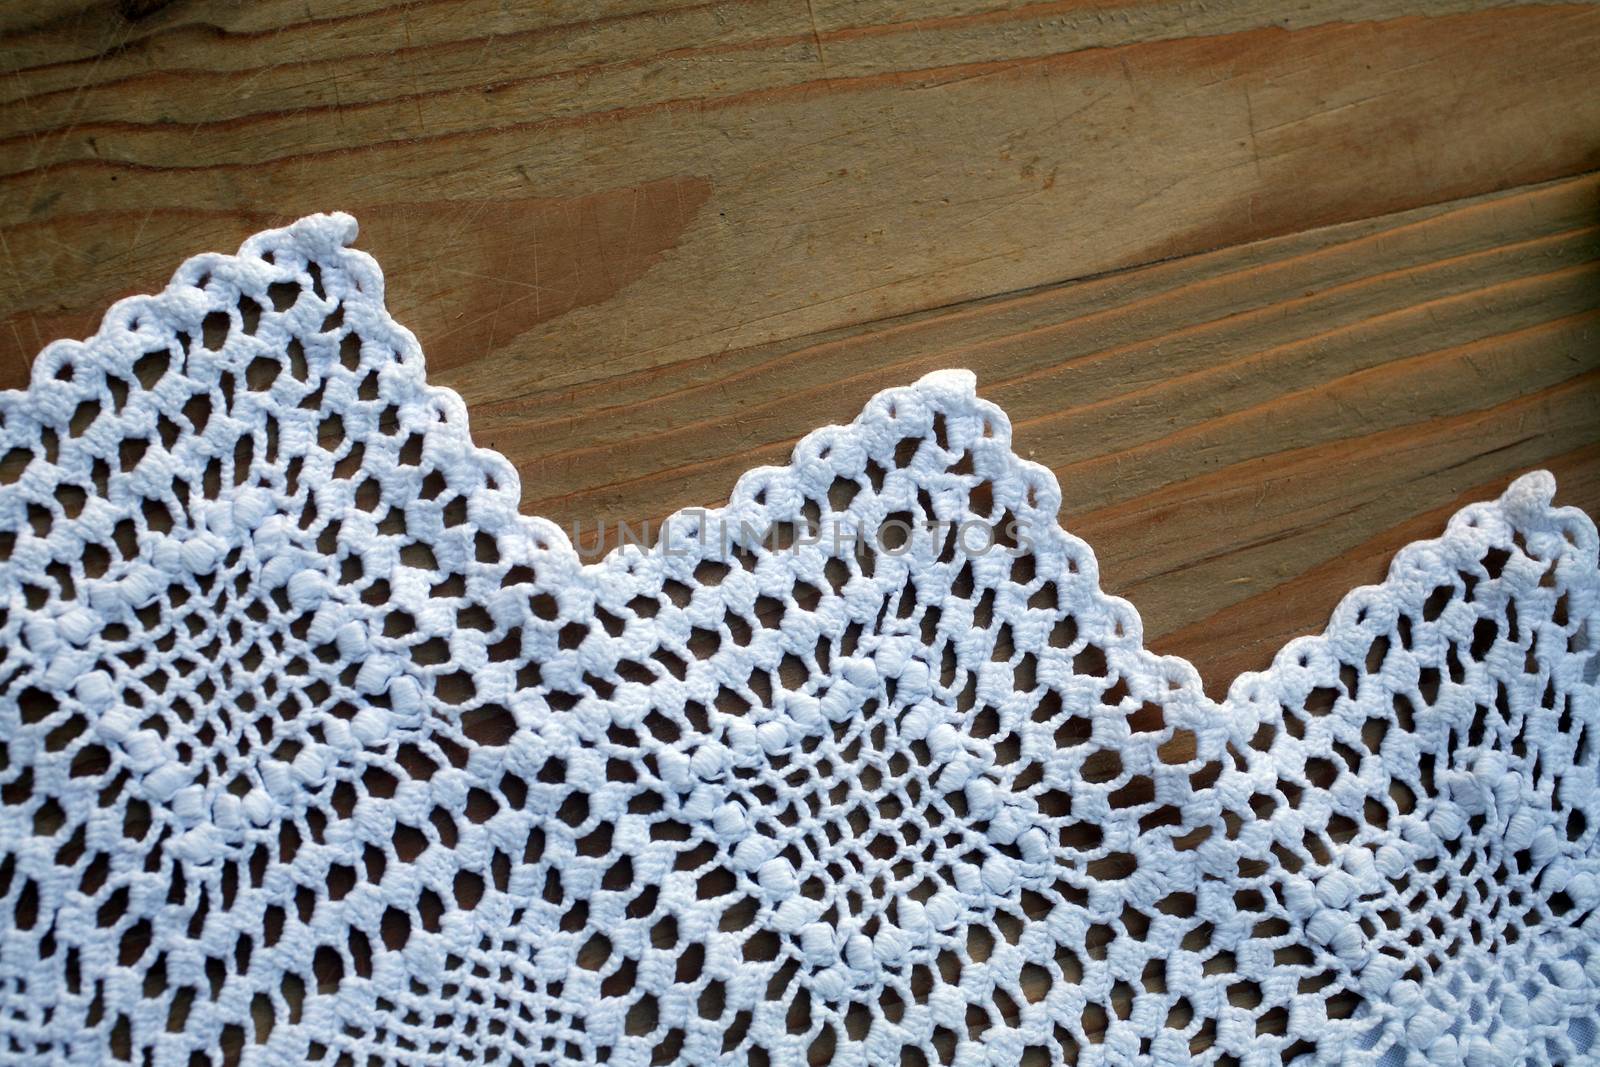 Detail of crochet tablecloth